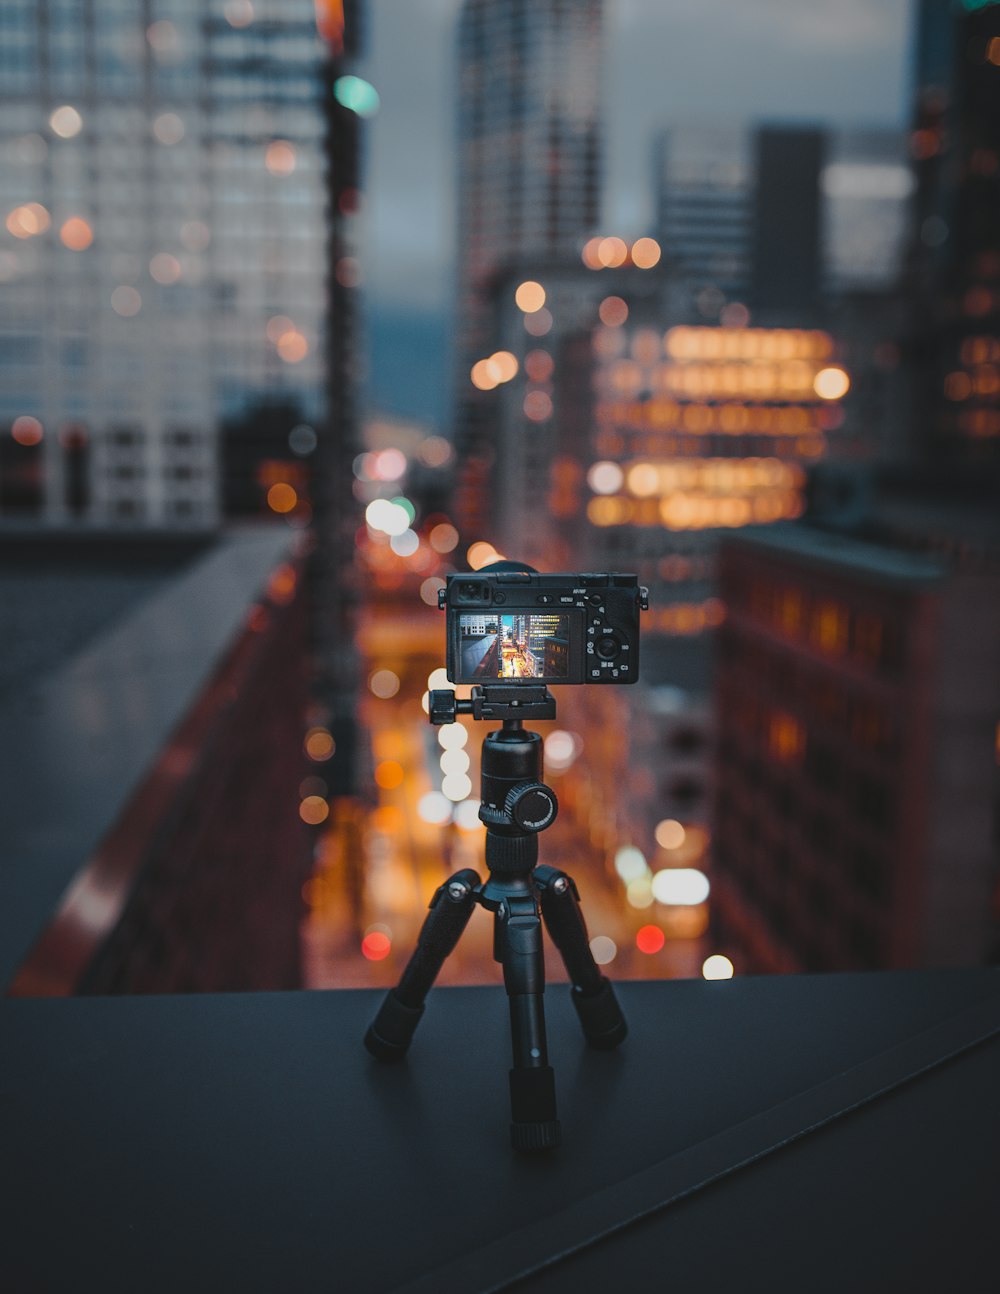 camera on tripod on building roof ledge at the city during night